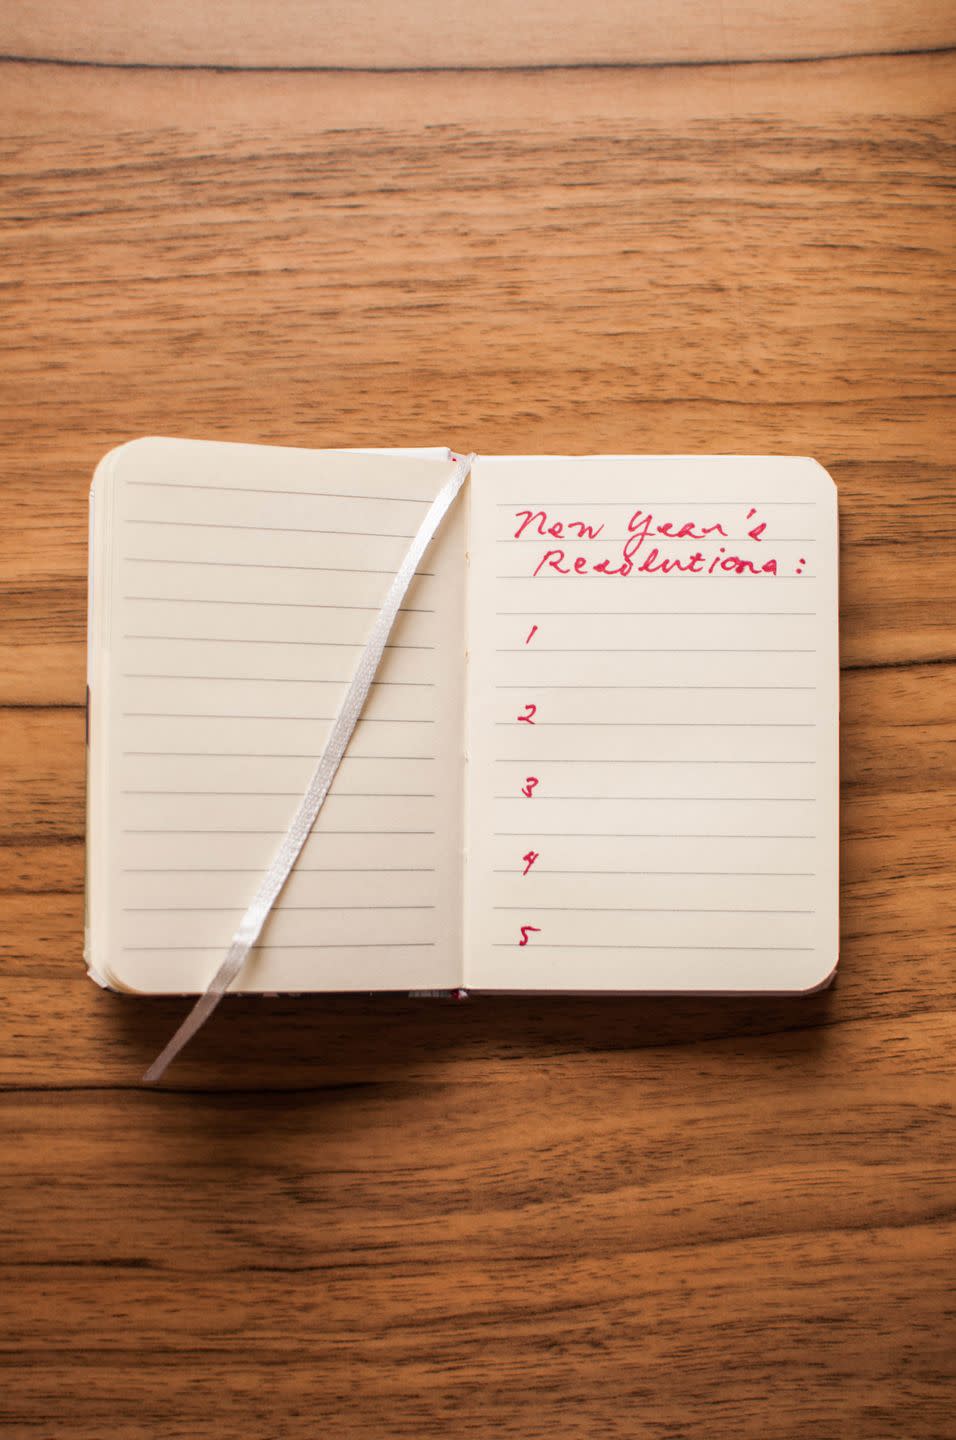 6) Write down your resolutions